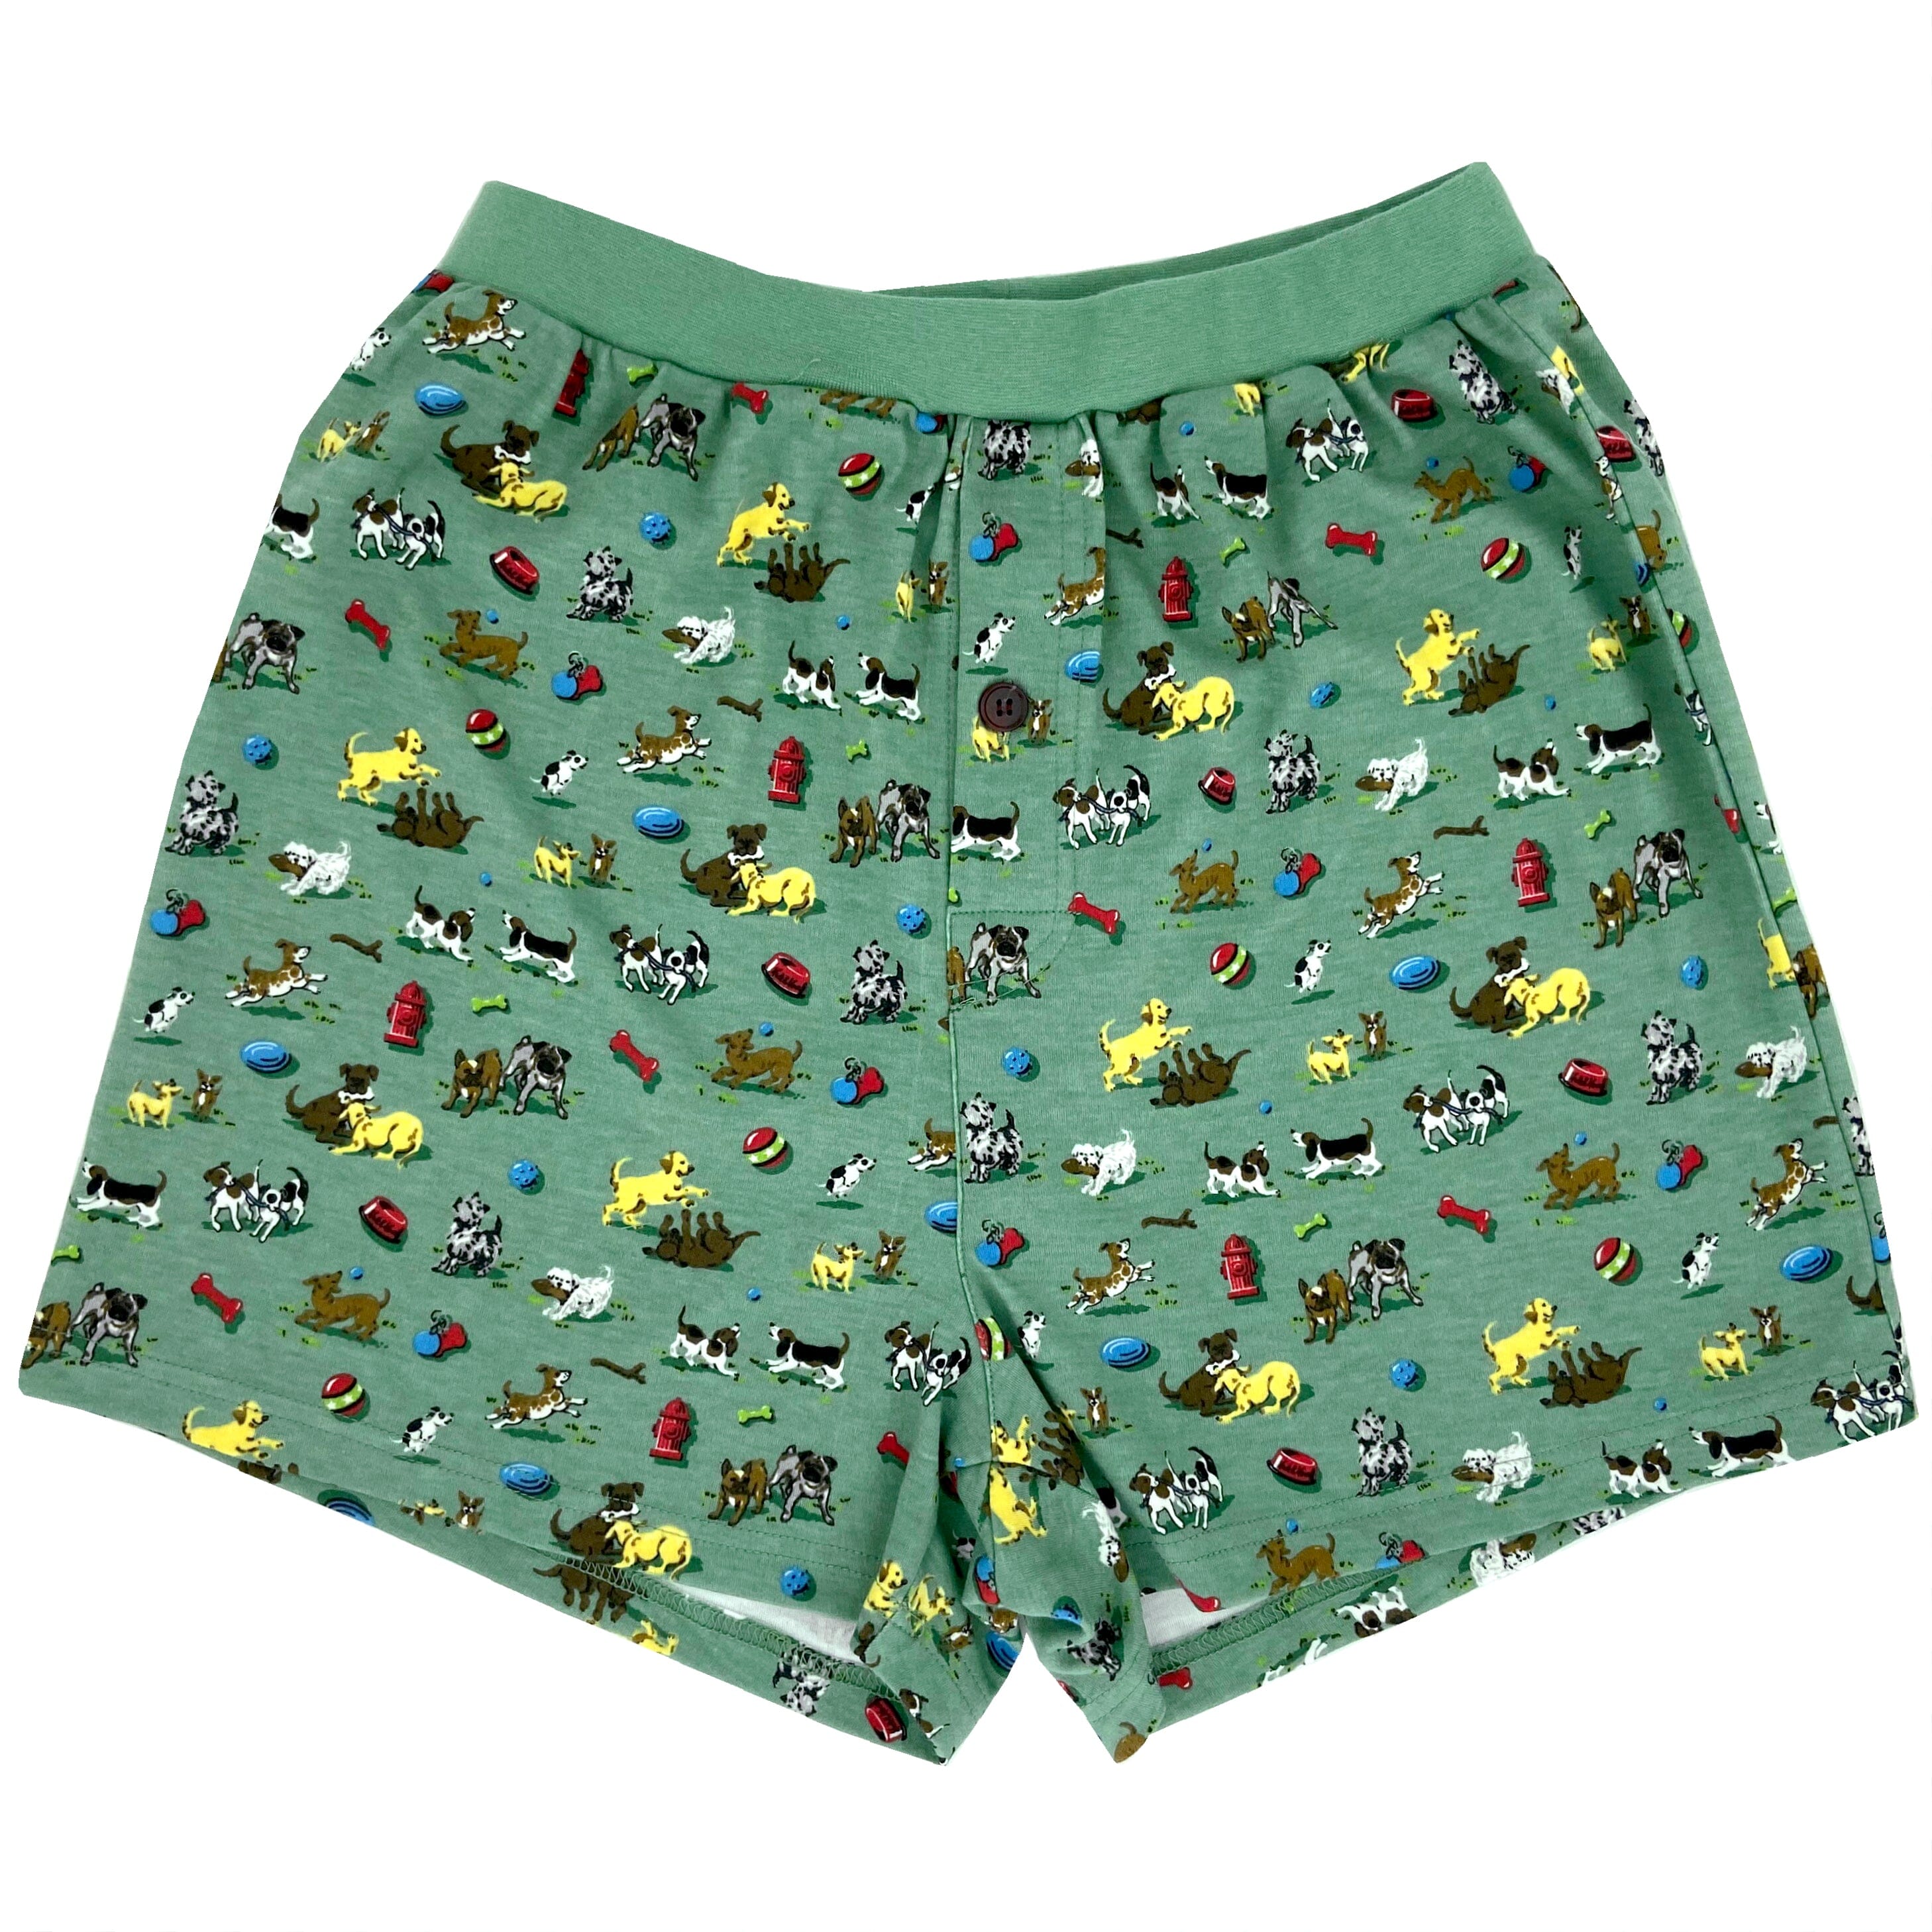 Pajama Shorts for Dog Lovers. Dog All Over Print Cotton Knit Pajama Shorts for Men